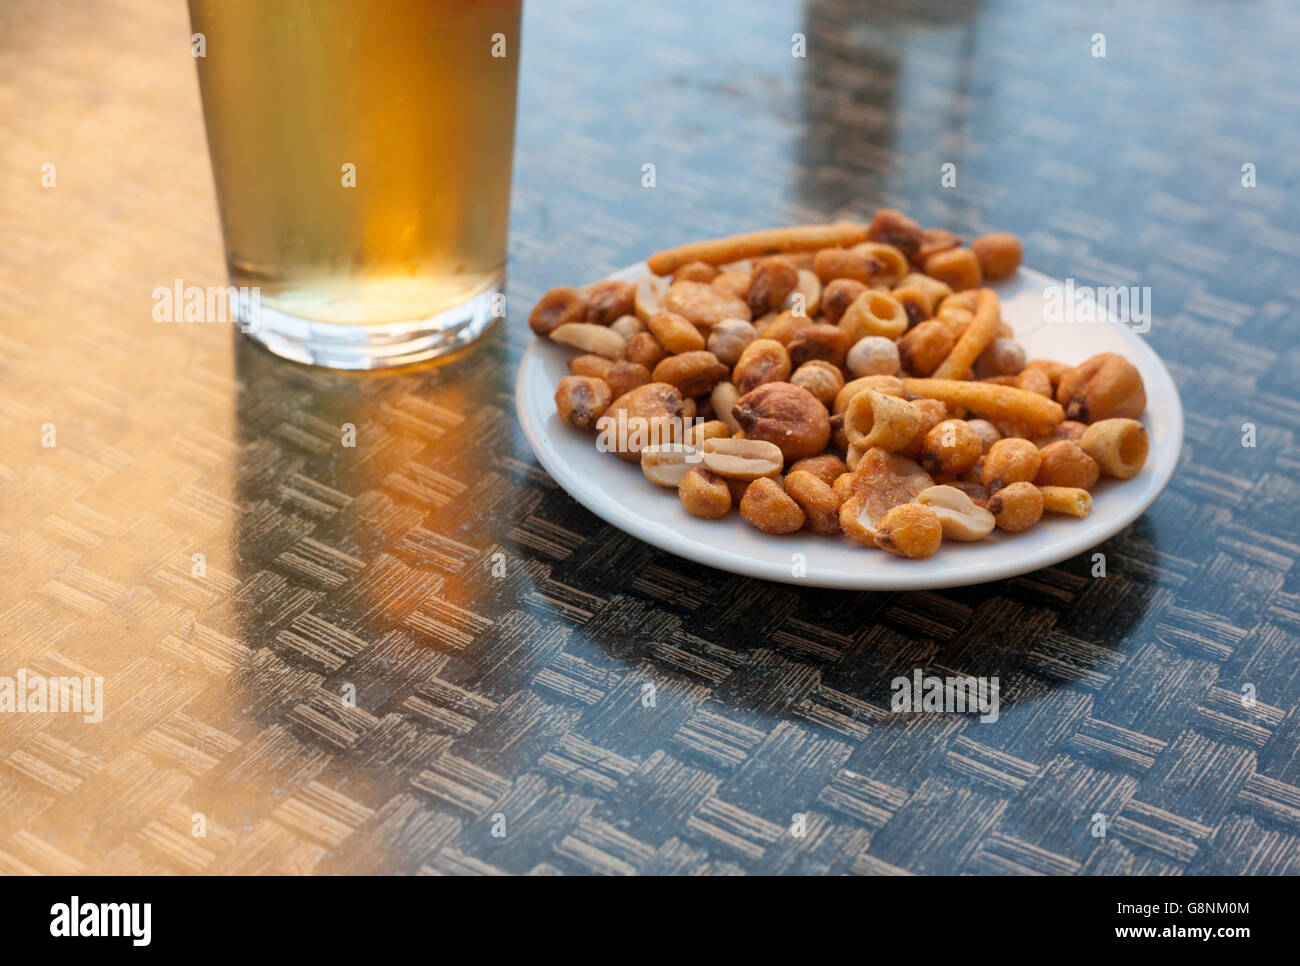 Cold glass of beer over terrace table with snack of dried fruit and nuts Stock Photo